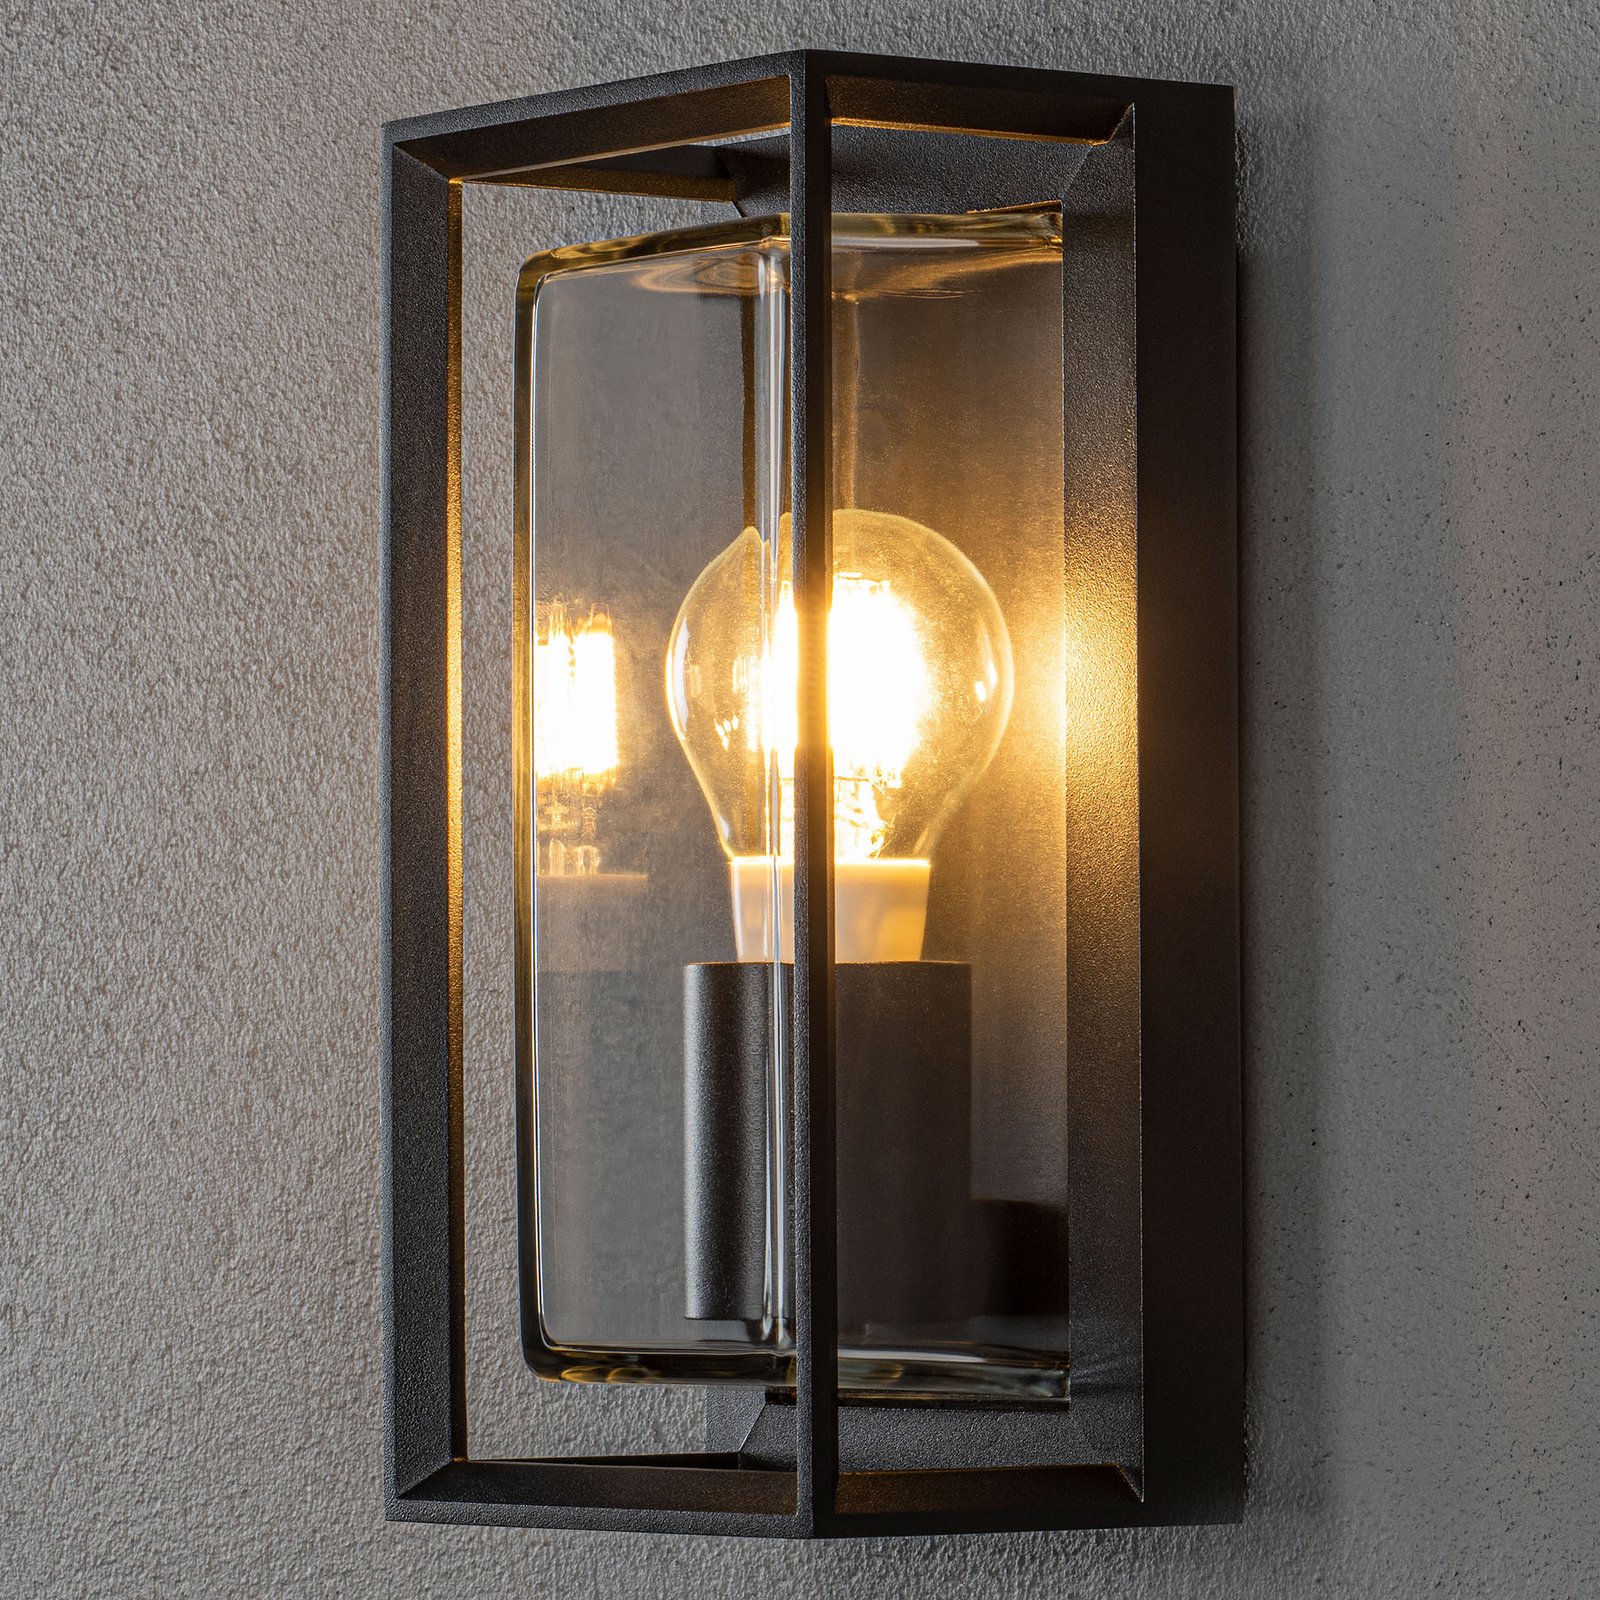 Brindisi outdoor wall light